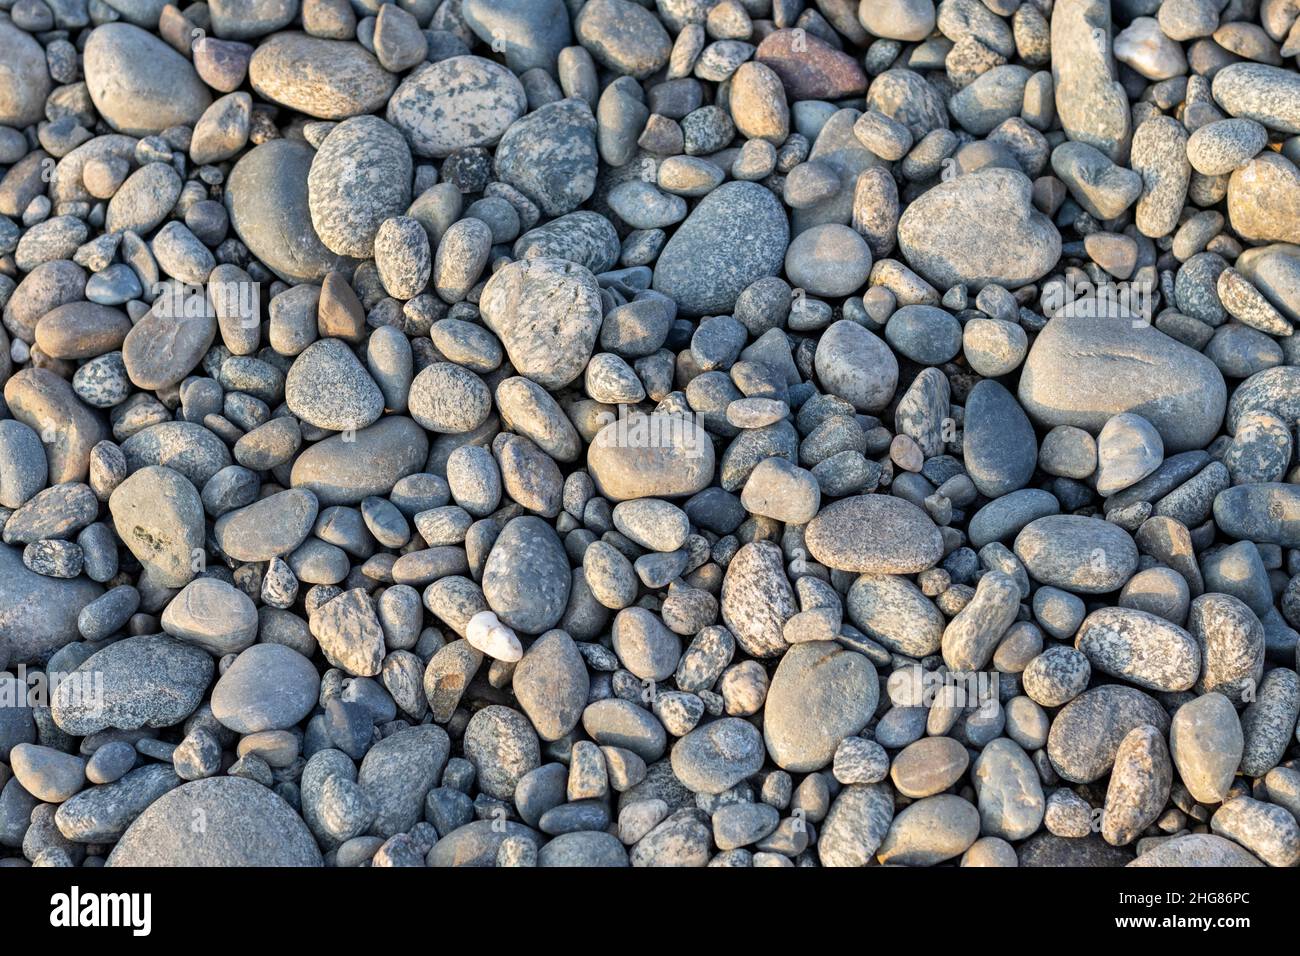 Natural river stone pebbles texture or background Stock Photo